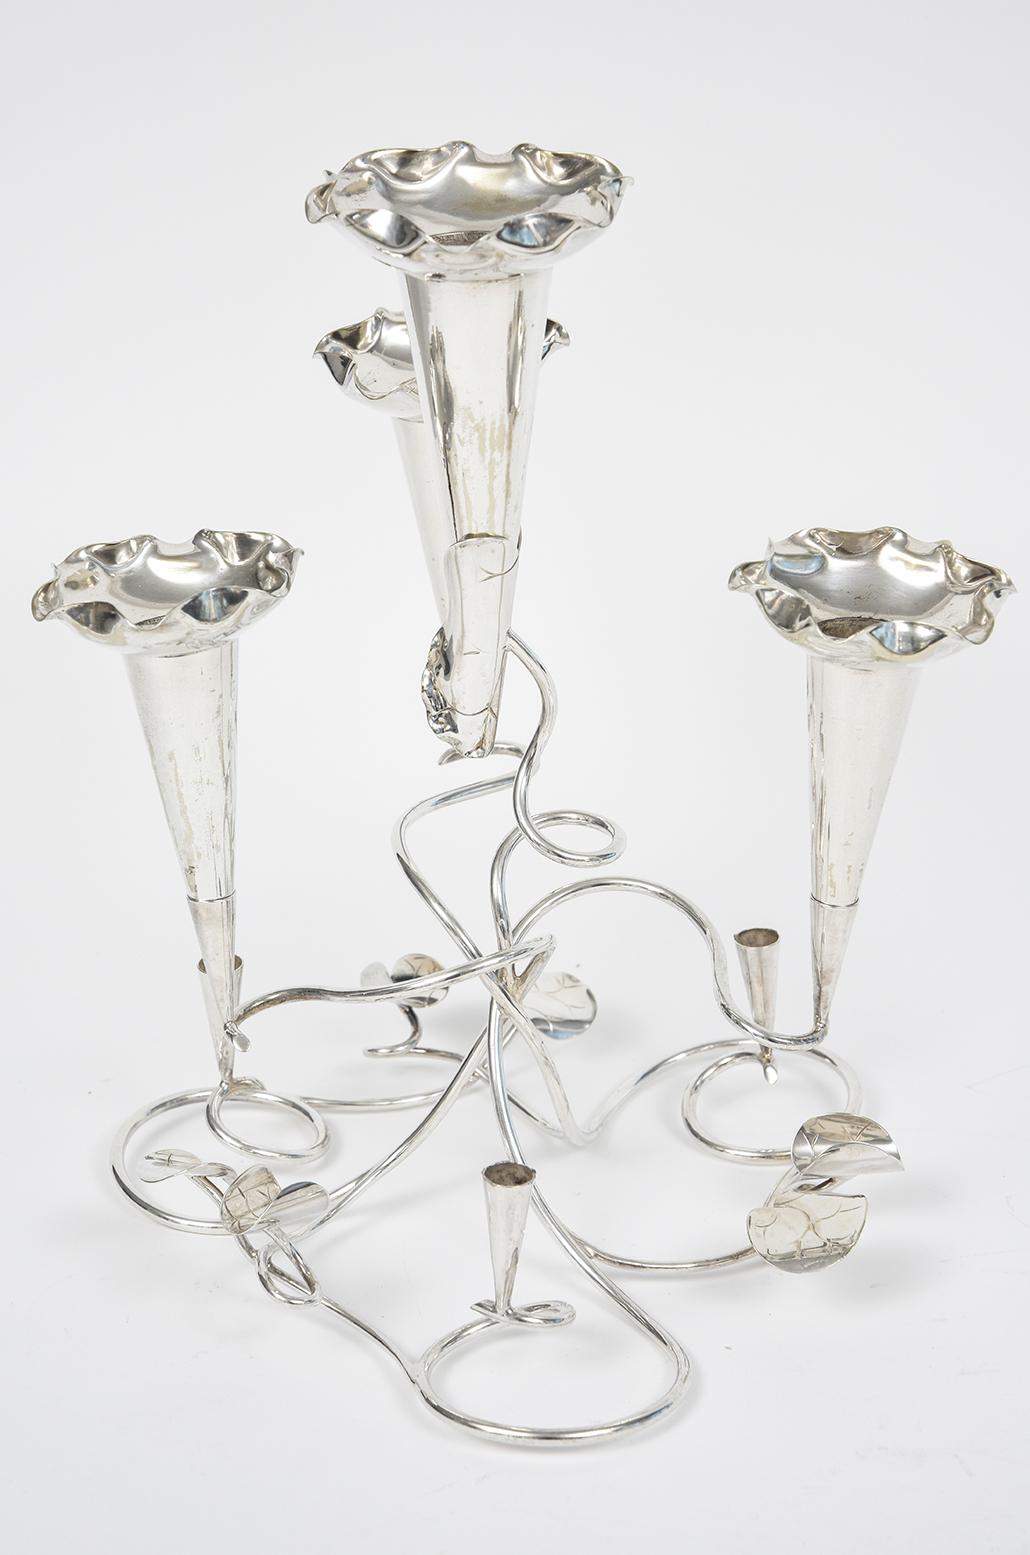 Early 20th Century Antique Silver Plate Epergne by Croft and Assinder Birmingham England For Sale